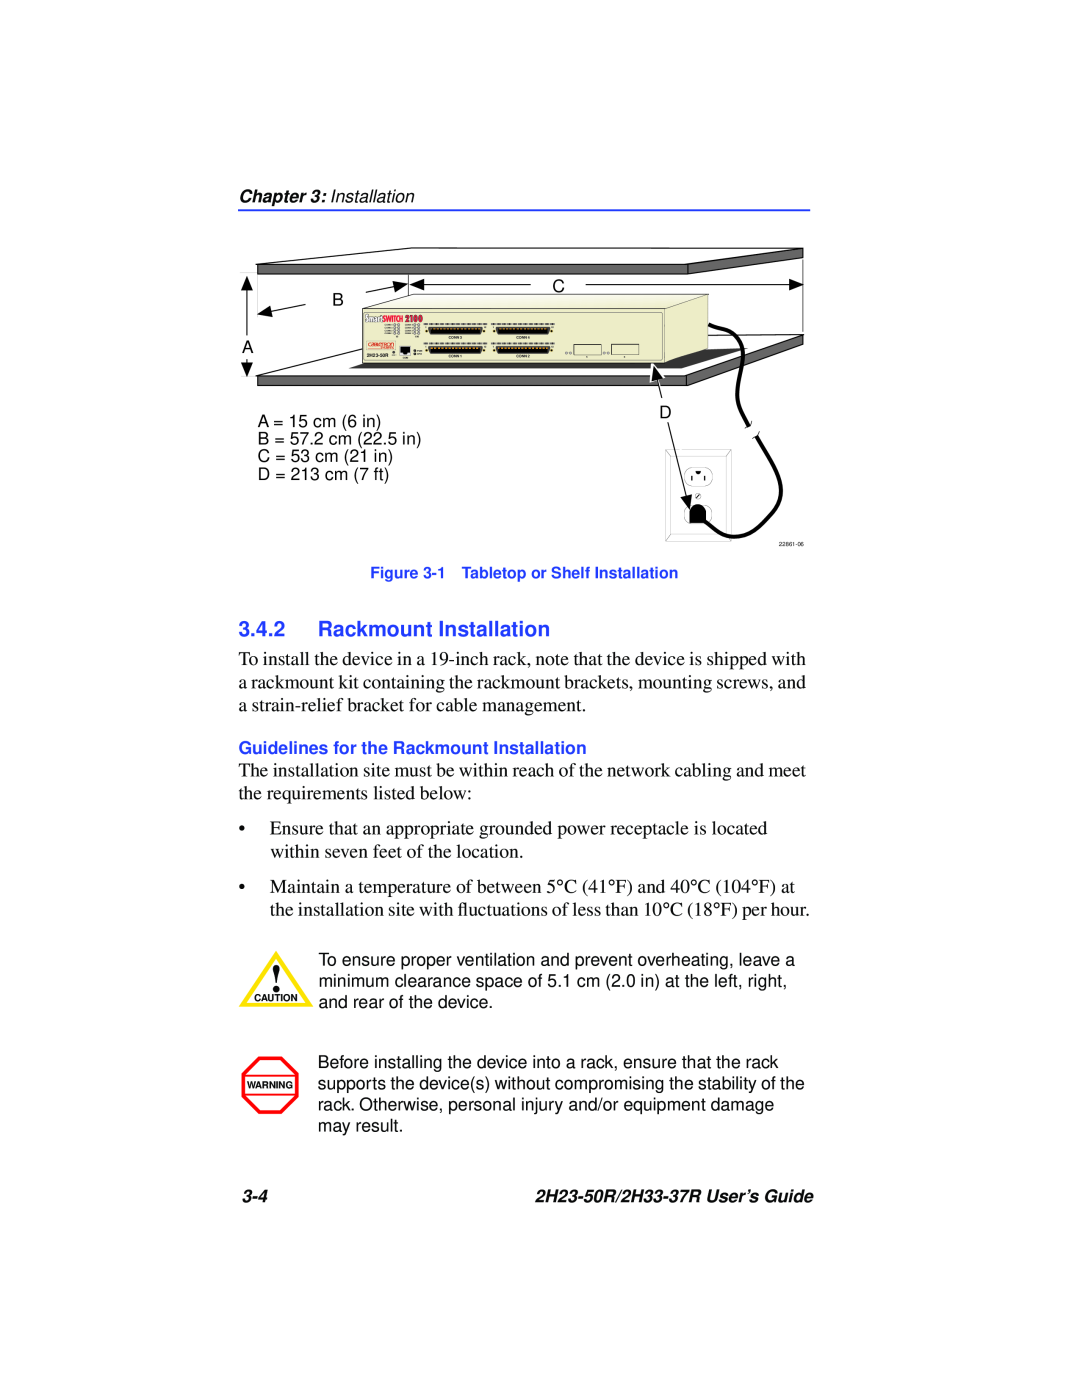 Cabletron Systems 2H33-37R, 2H23-50R manual Guidelines for the Rackmount Installation 